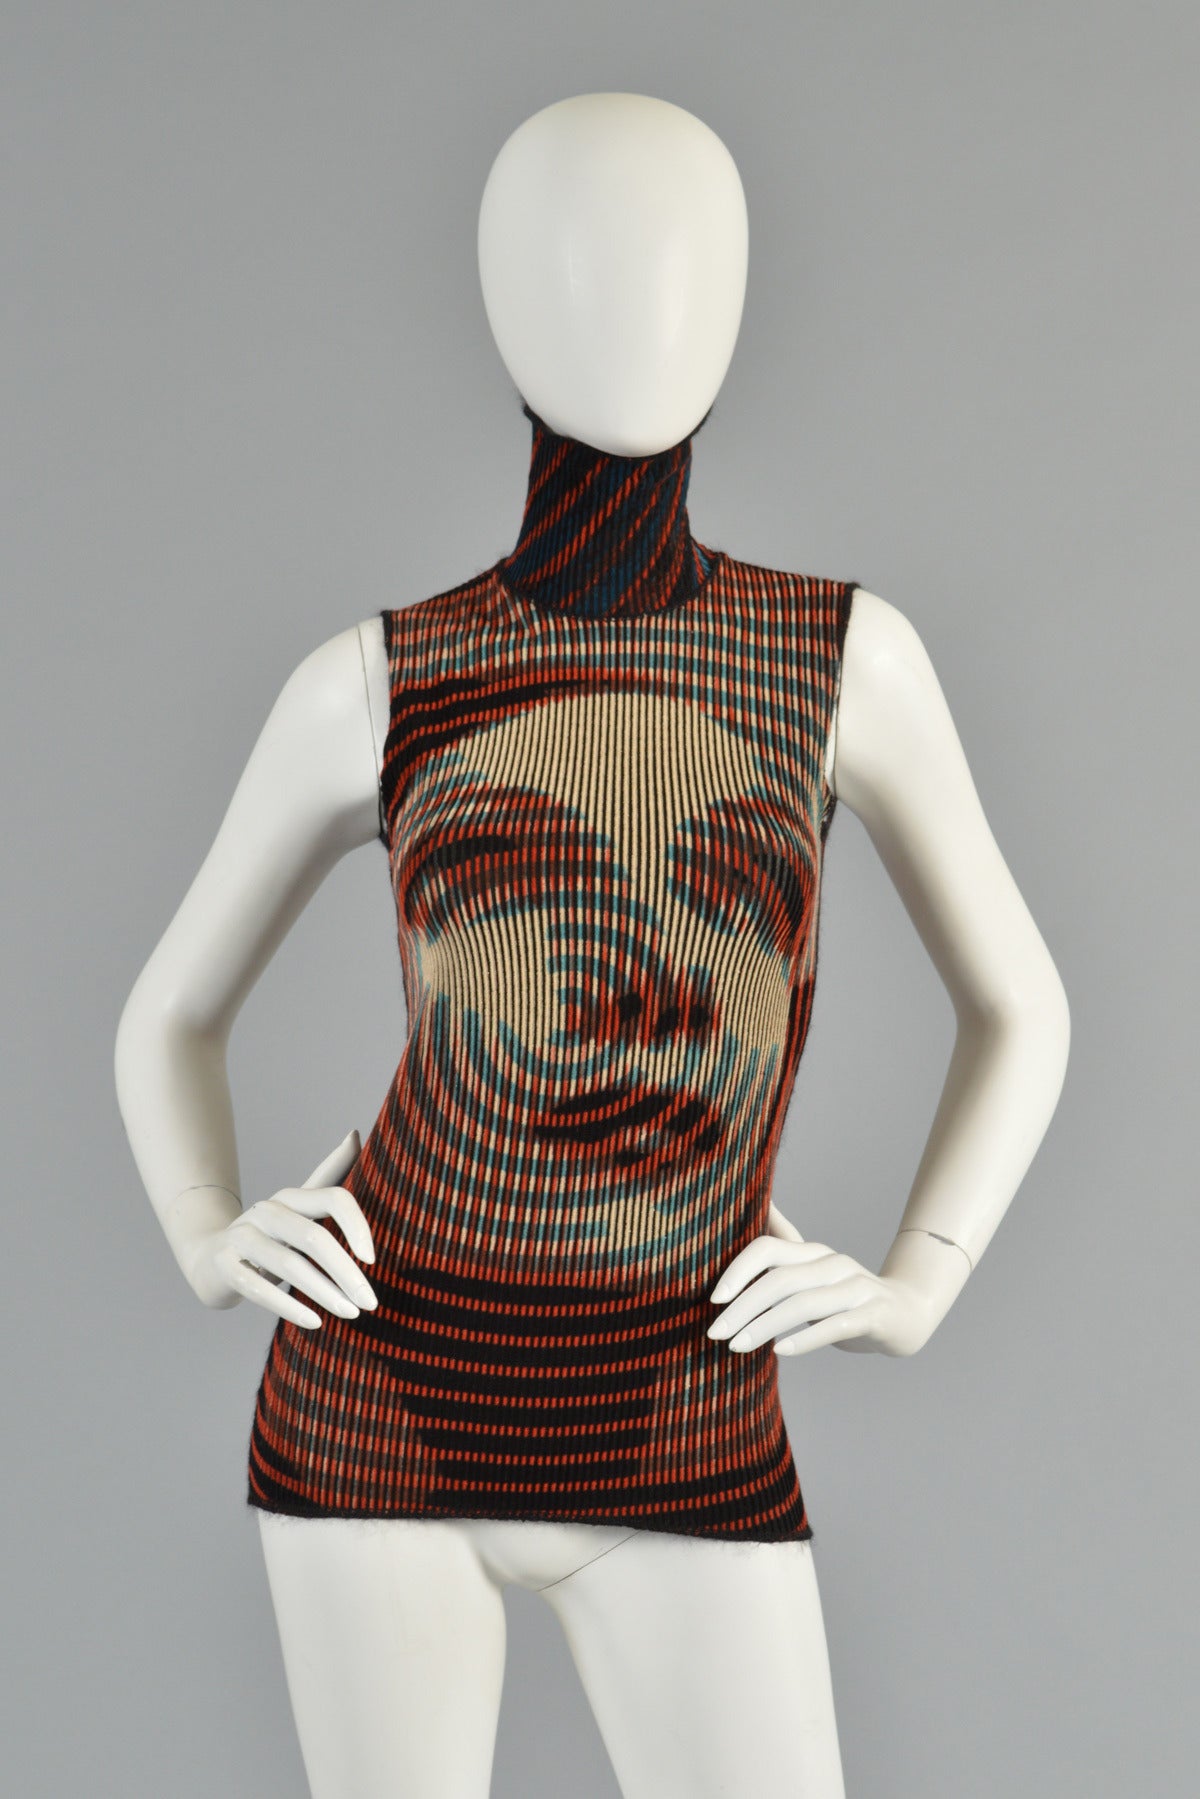 Insane vintage Jean Paul Gaultier unisex op art tunic top. AMAZING piece + ultra rare find. Ultra fitted rib-knit tunic is made from ultra soft silky airbrushed velvet with an incredible portrait of (who we believe to be) Joan Crawford. The pattern